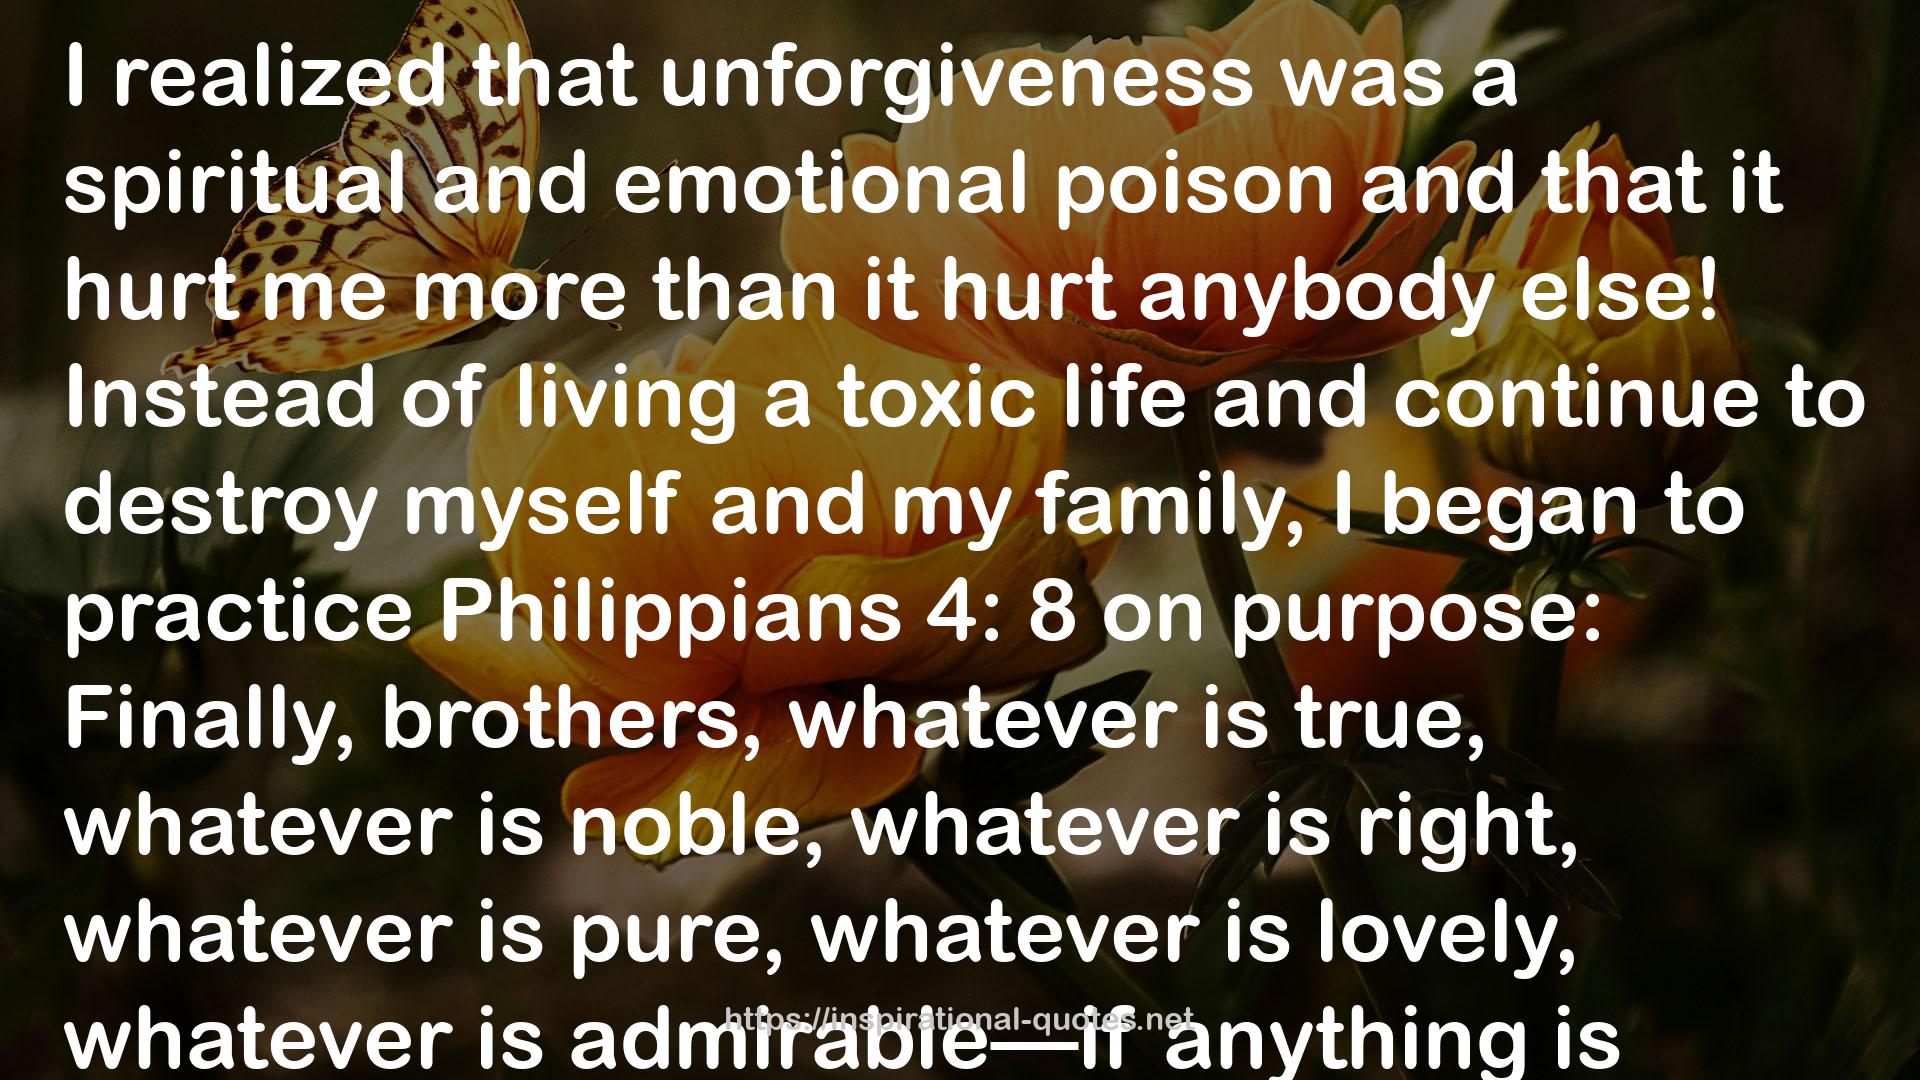 a toxic life  QUOTES